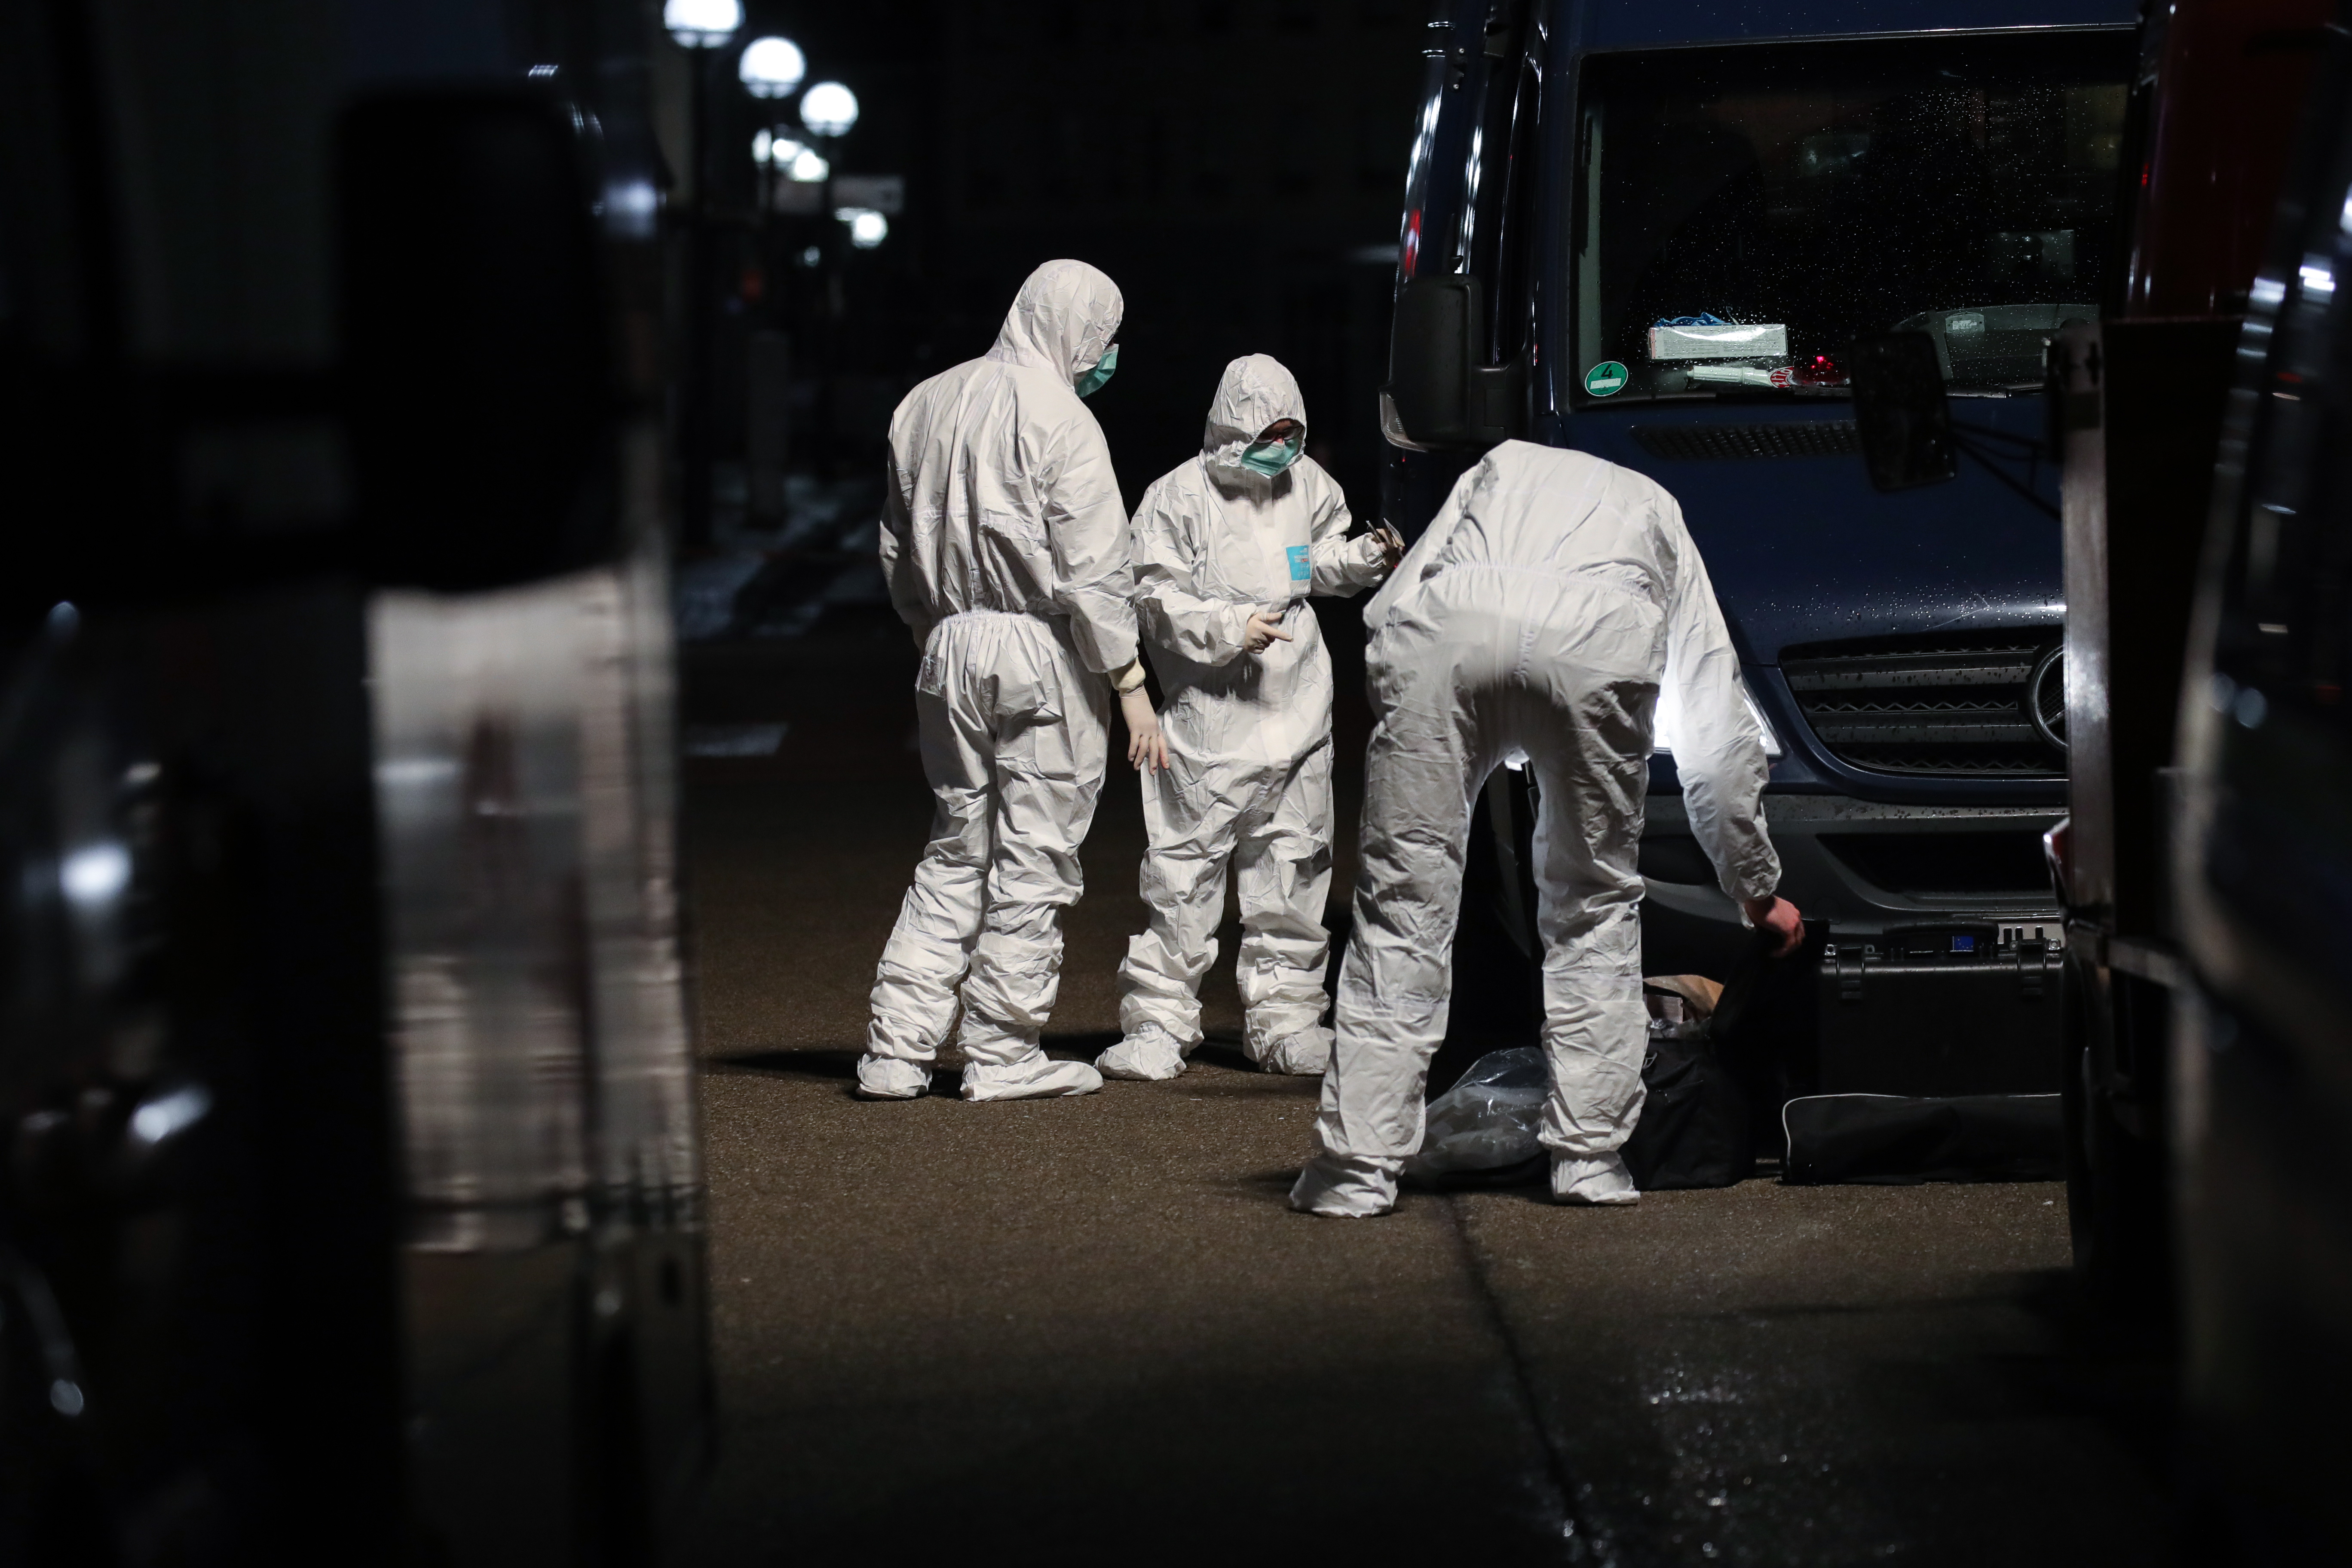  Forensic officers can be seen examining the scene